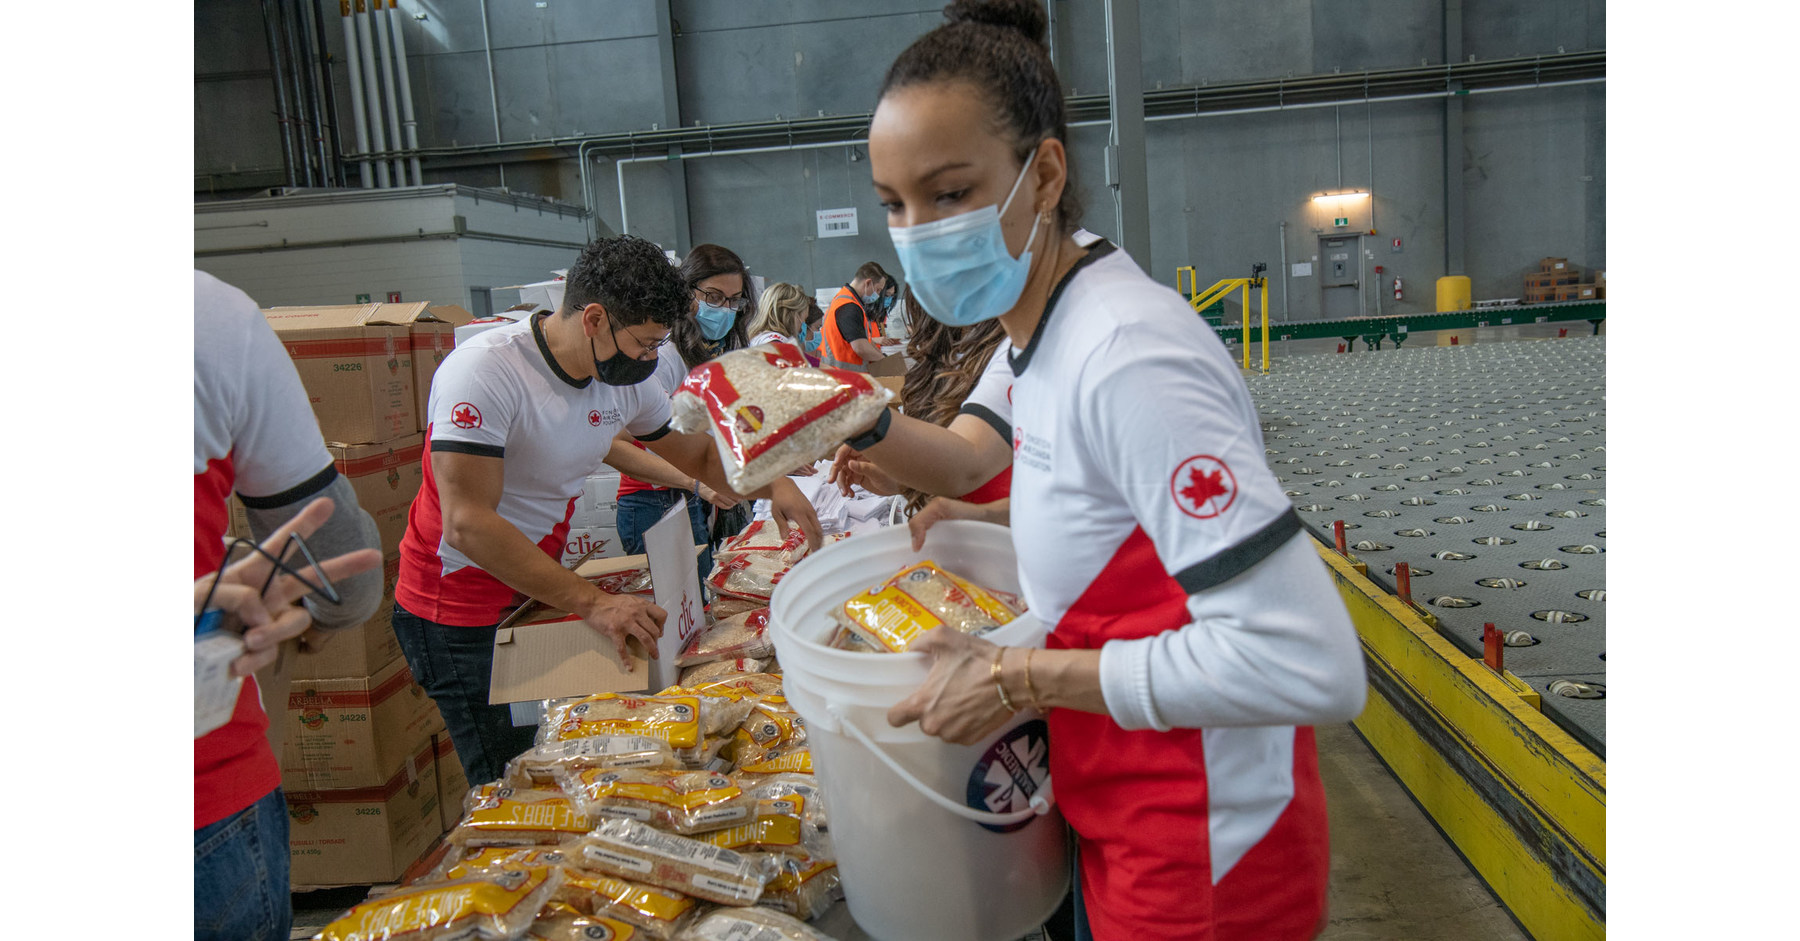 Air Canada, Airlink, Flexport.org and GlobalMedic Send Aid and Medical Supplies to Support Ukrainian Refugees on Second Special Humanitarian Flight - Canada NewsWire